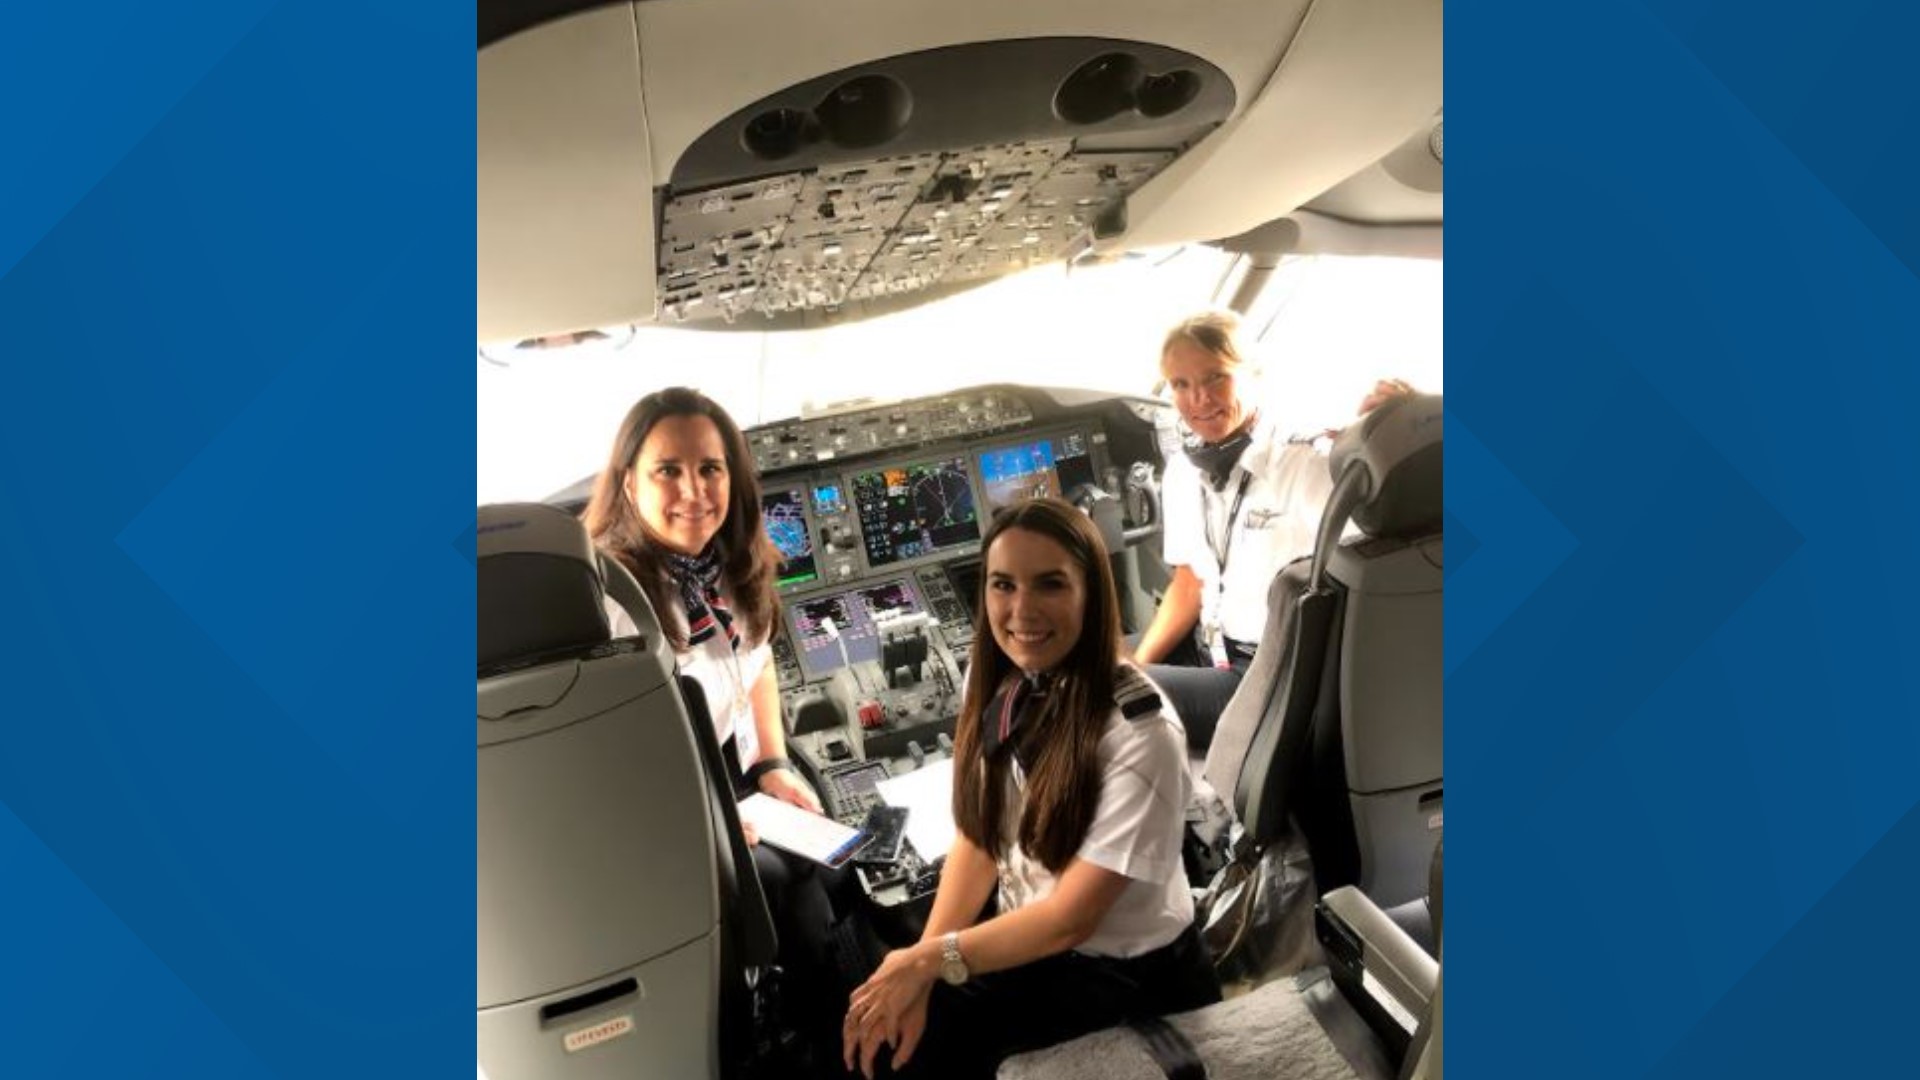 Saturday, September 25, 2021 is "International Girls in Aviation Day." It's why a local chapter of the organization is hosting an event just for girls.